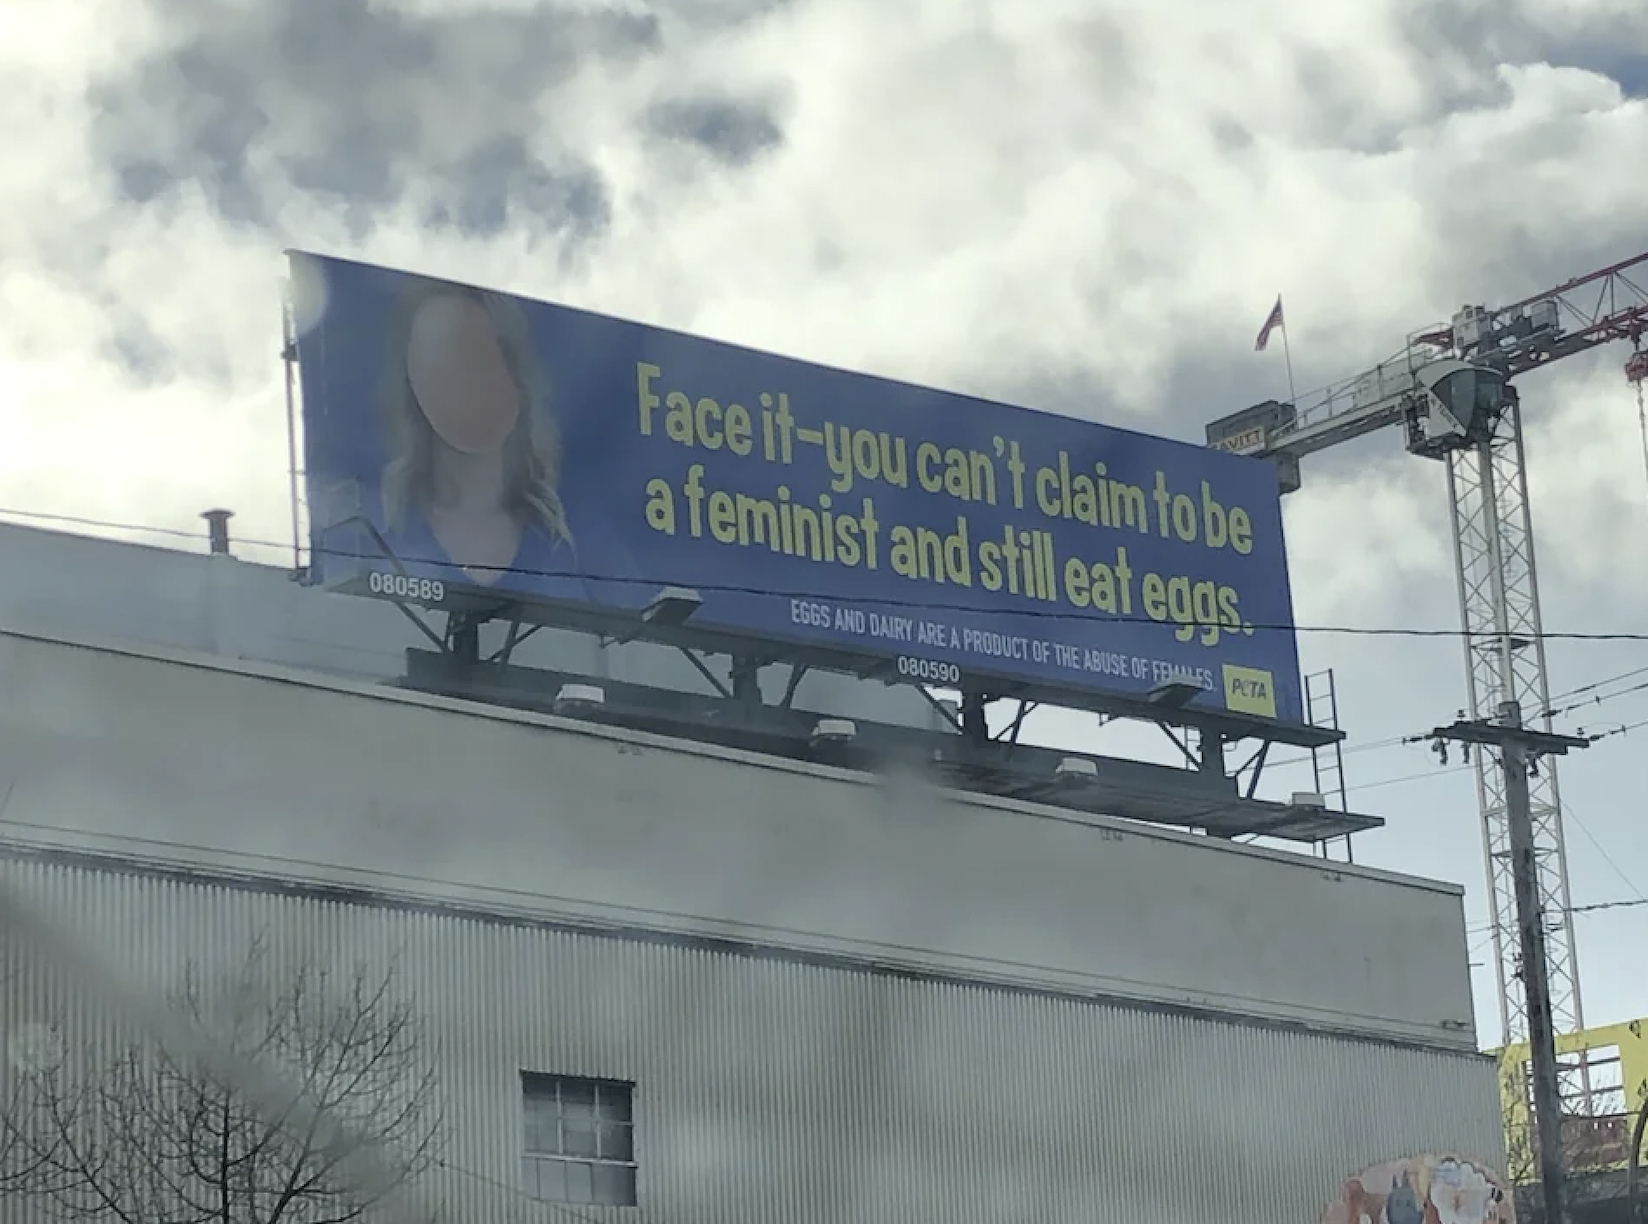 billboard - 080589 Face ityou can't claim to be a feminist and still eat eggs. Eggs And Dairy Are A Product Of The Abuse Of Females Pita 080590